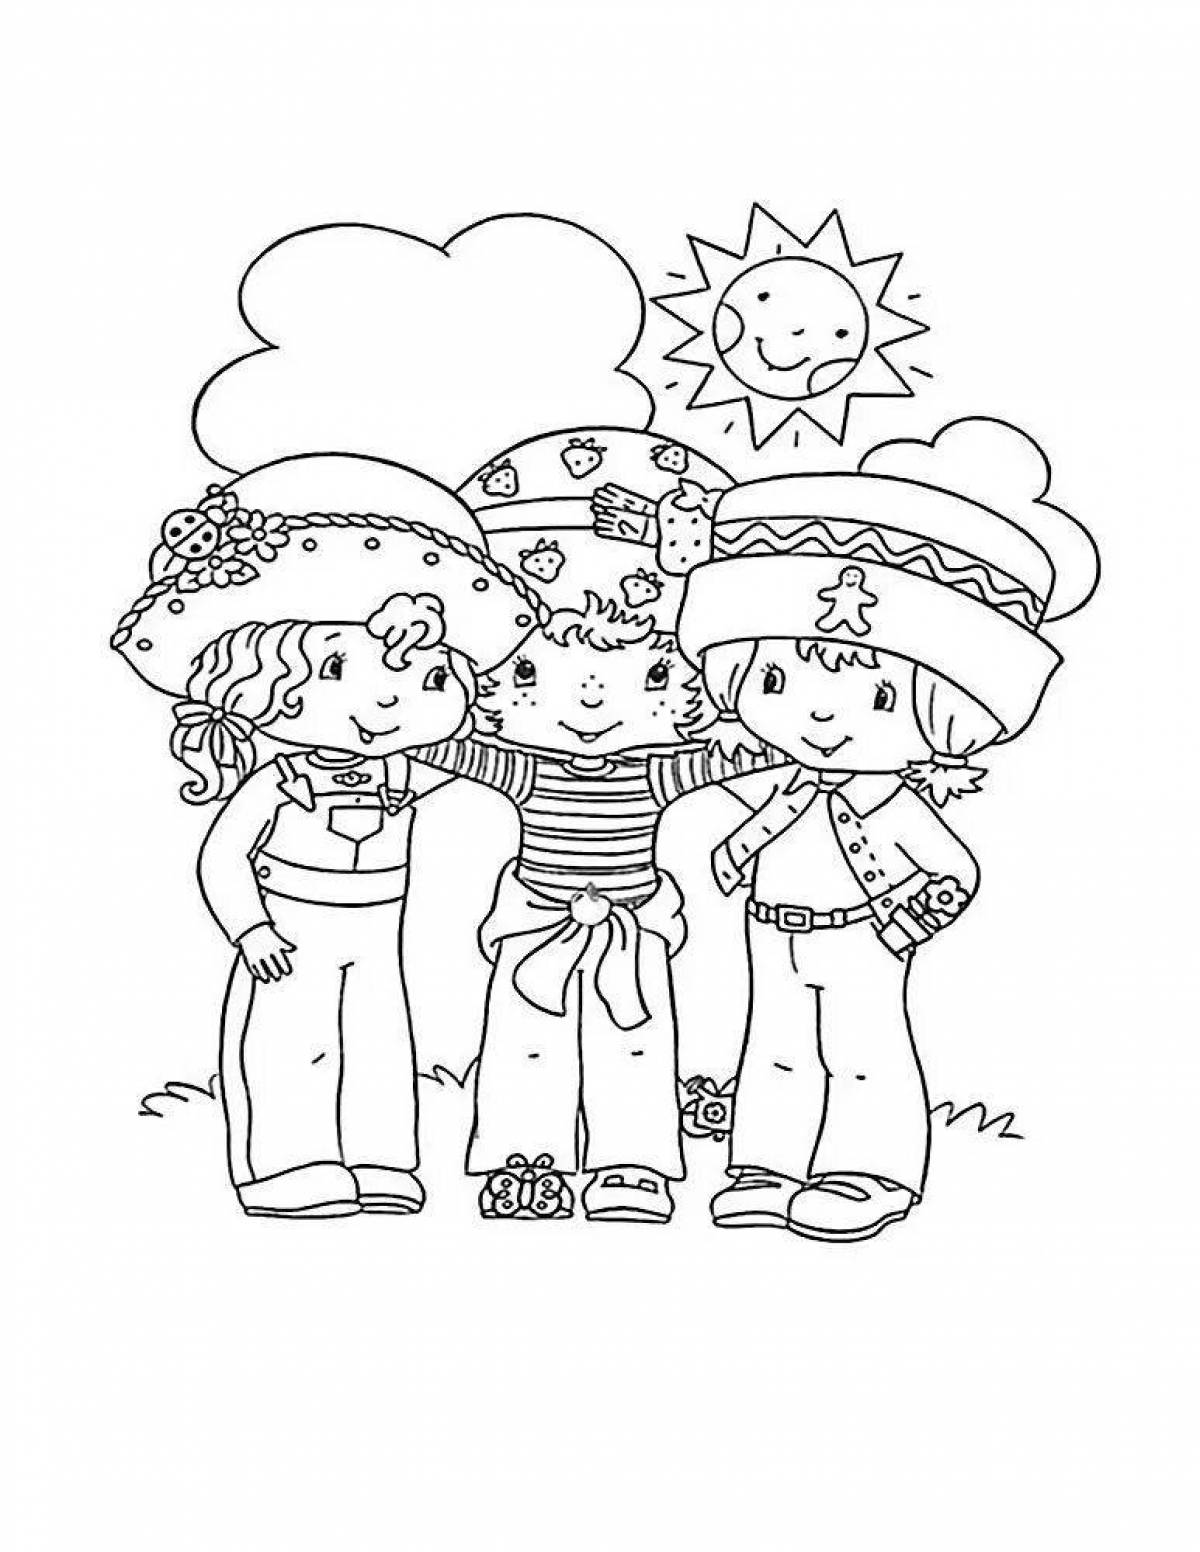 Fun friendship coloring book for kids